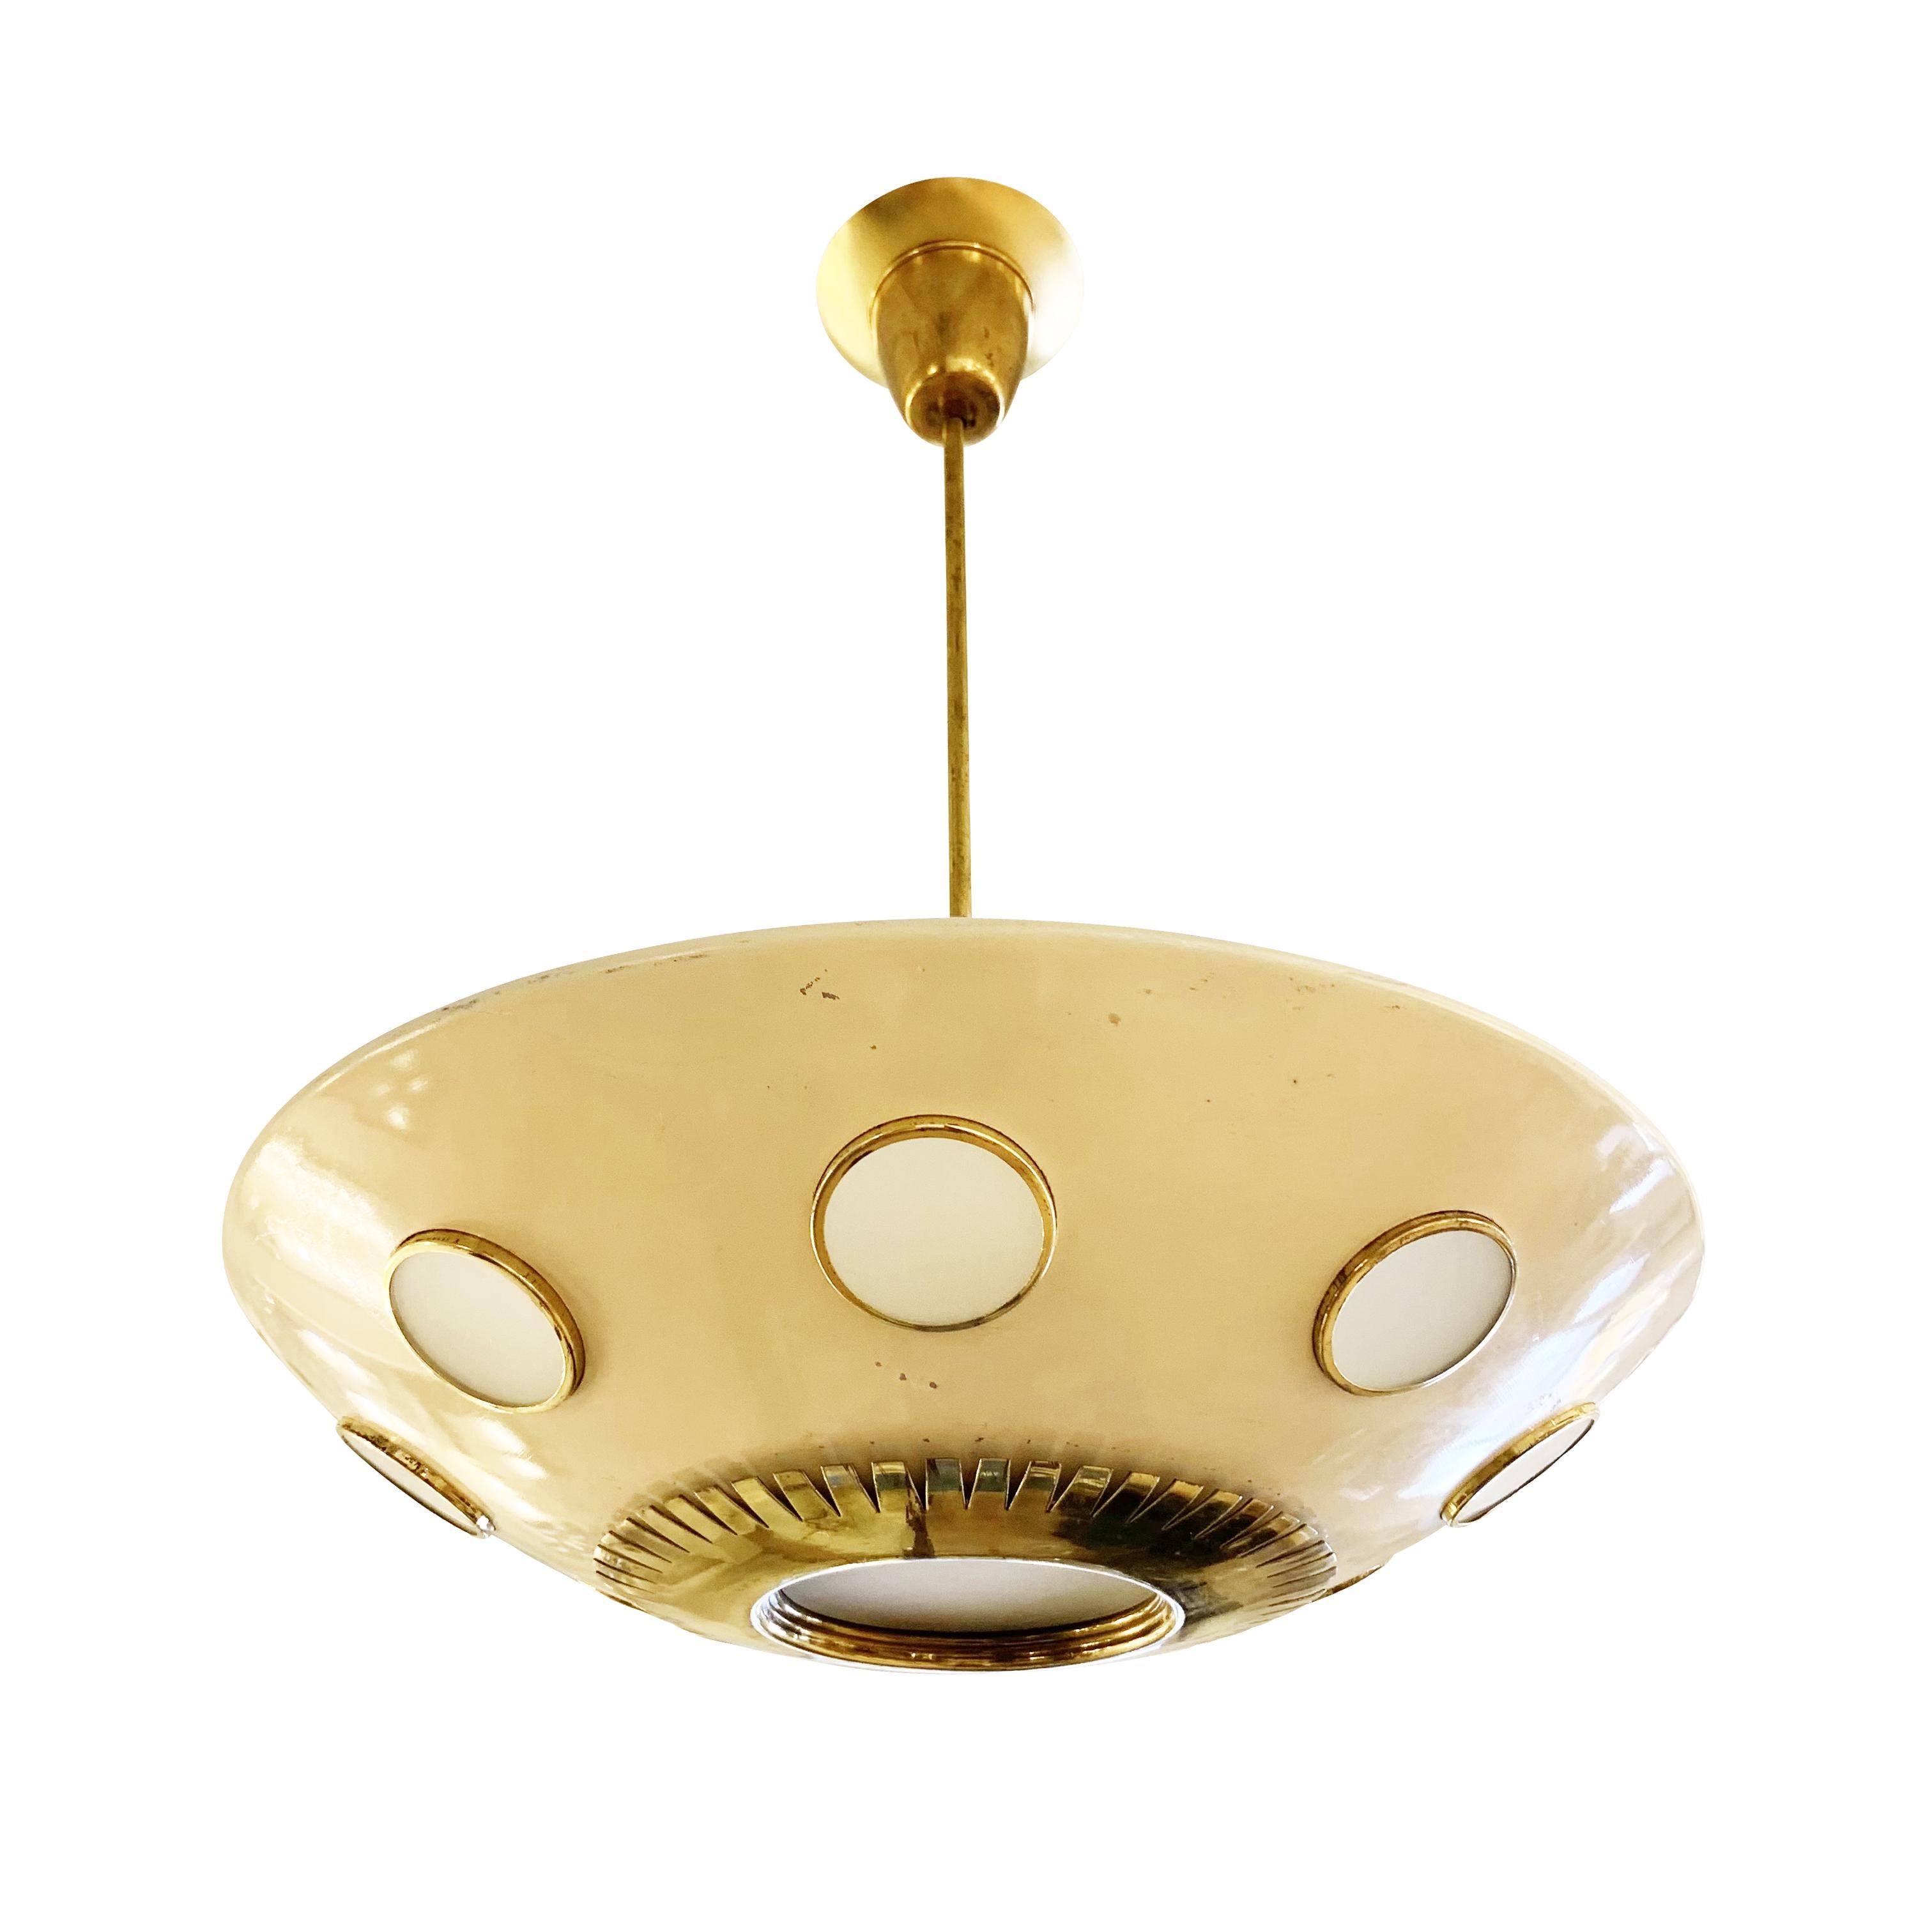 Italian Mid-Century pendant attributed to Oscar Torlasco for Lumi. The off-white lacquered frame has brass details and embedded glass diffusers.

Condition: Good vintage condition, minor wear and marks consistent with age and use.

Diameter: